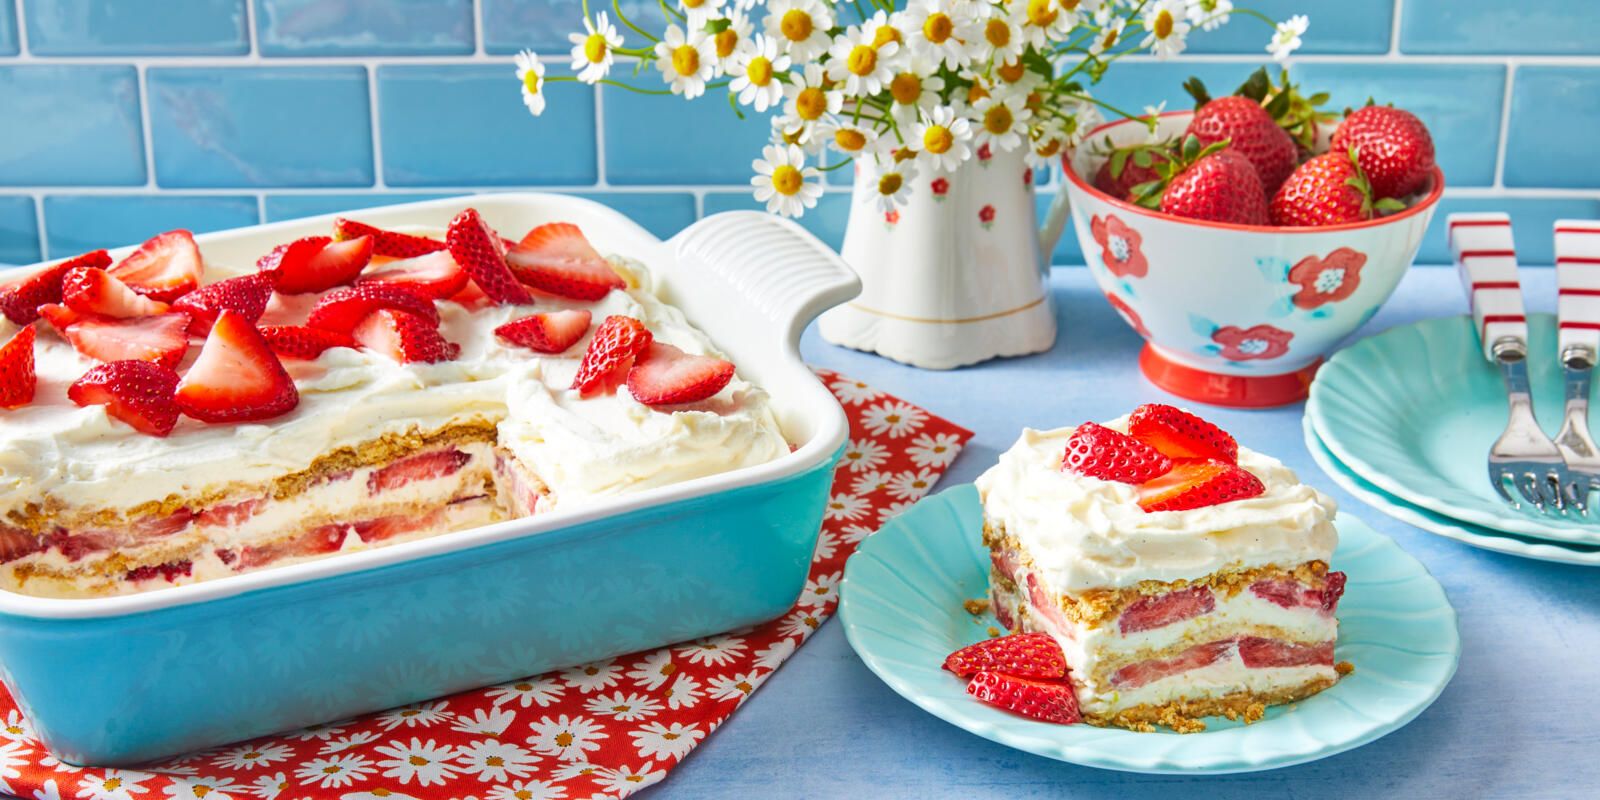 Fresh Strawberry Cake Recipe- All-Natural with 2 lbs Strawberries!